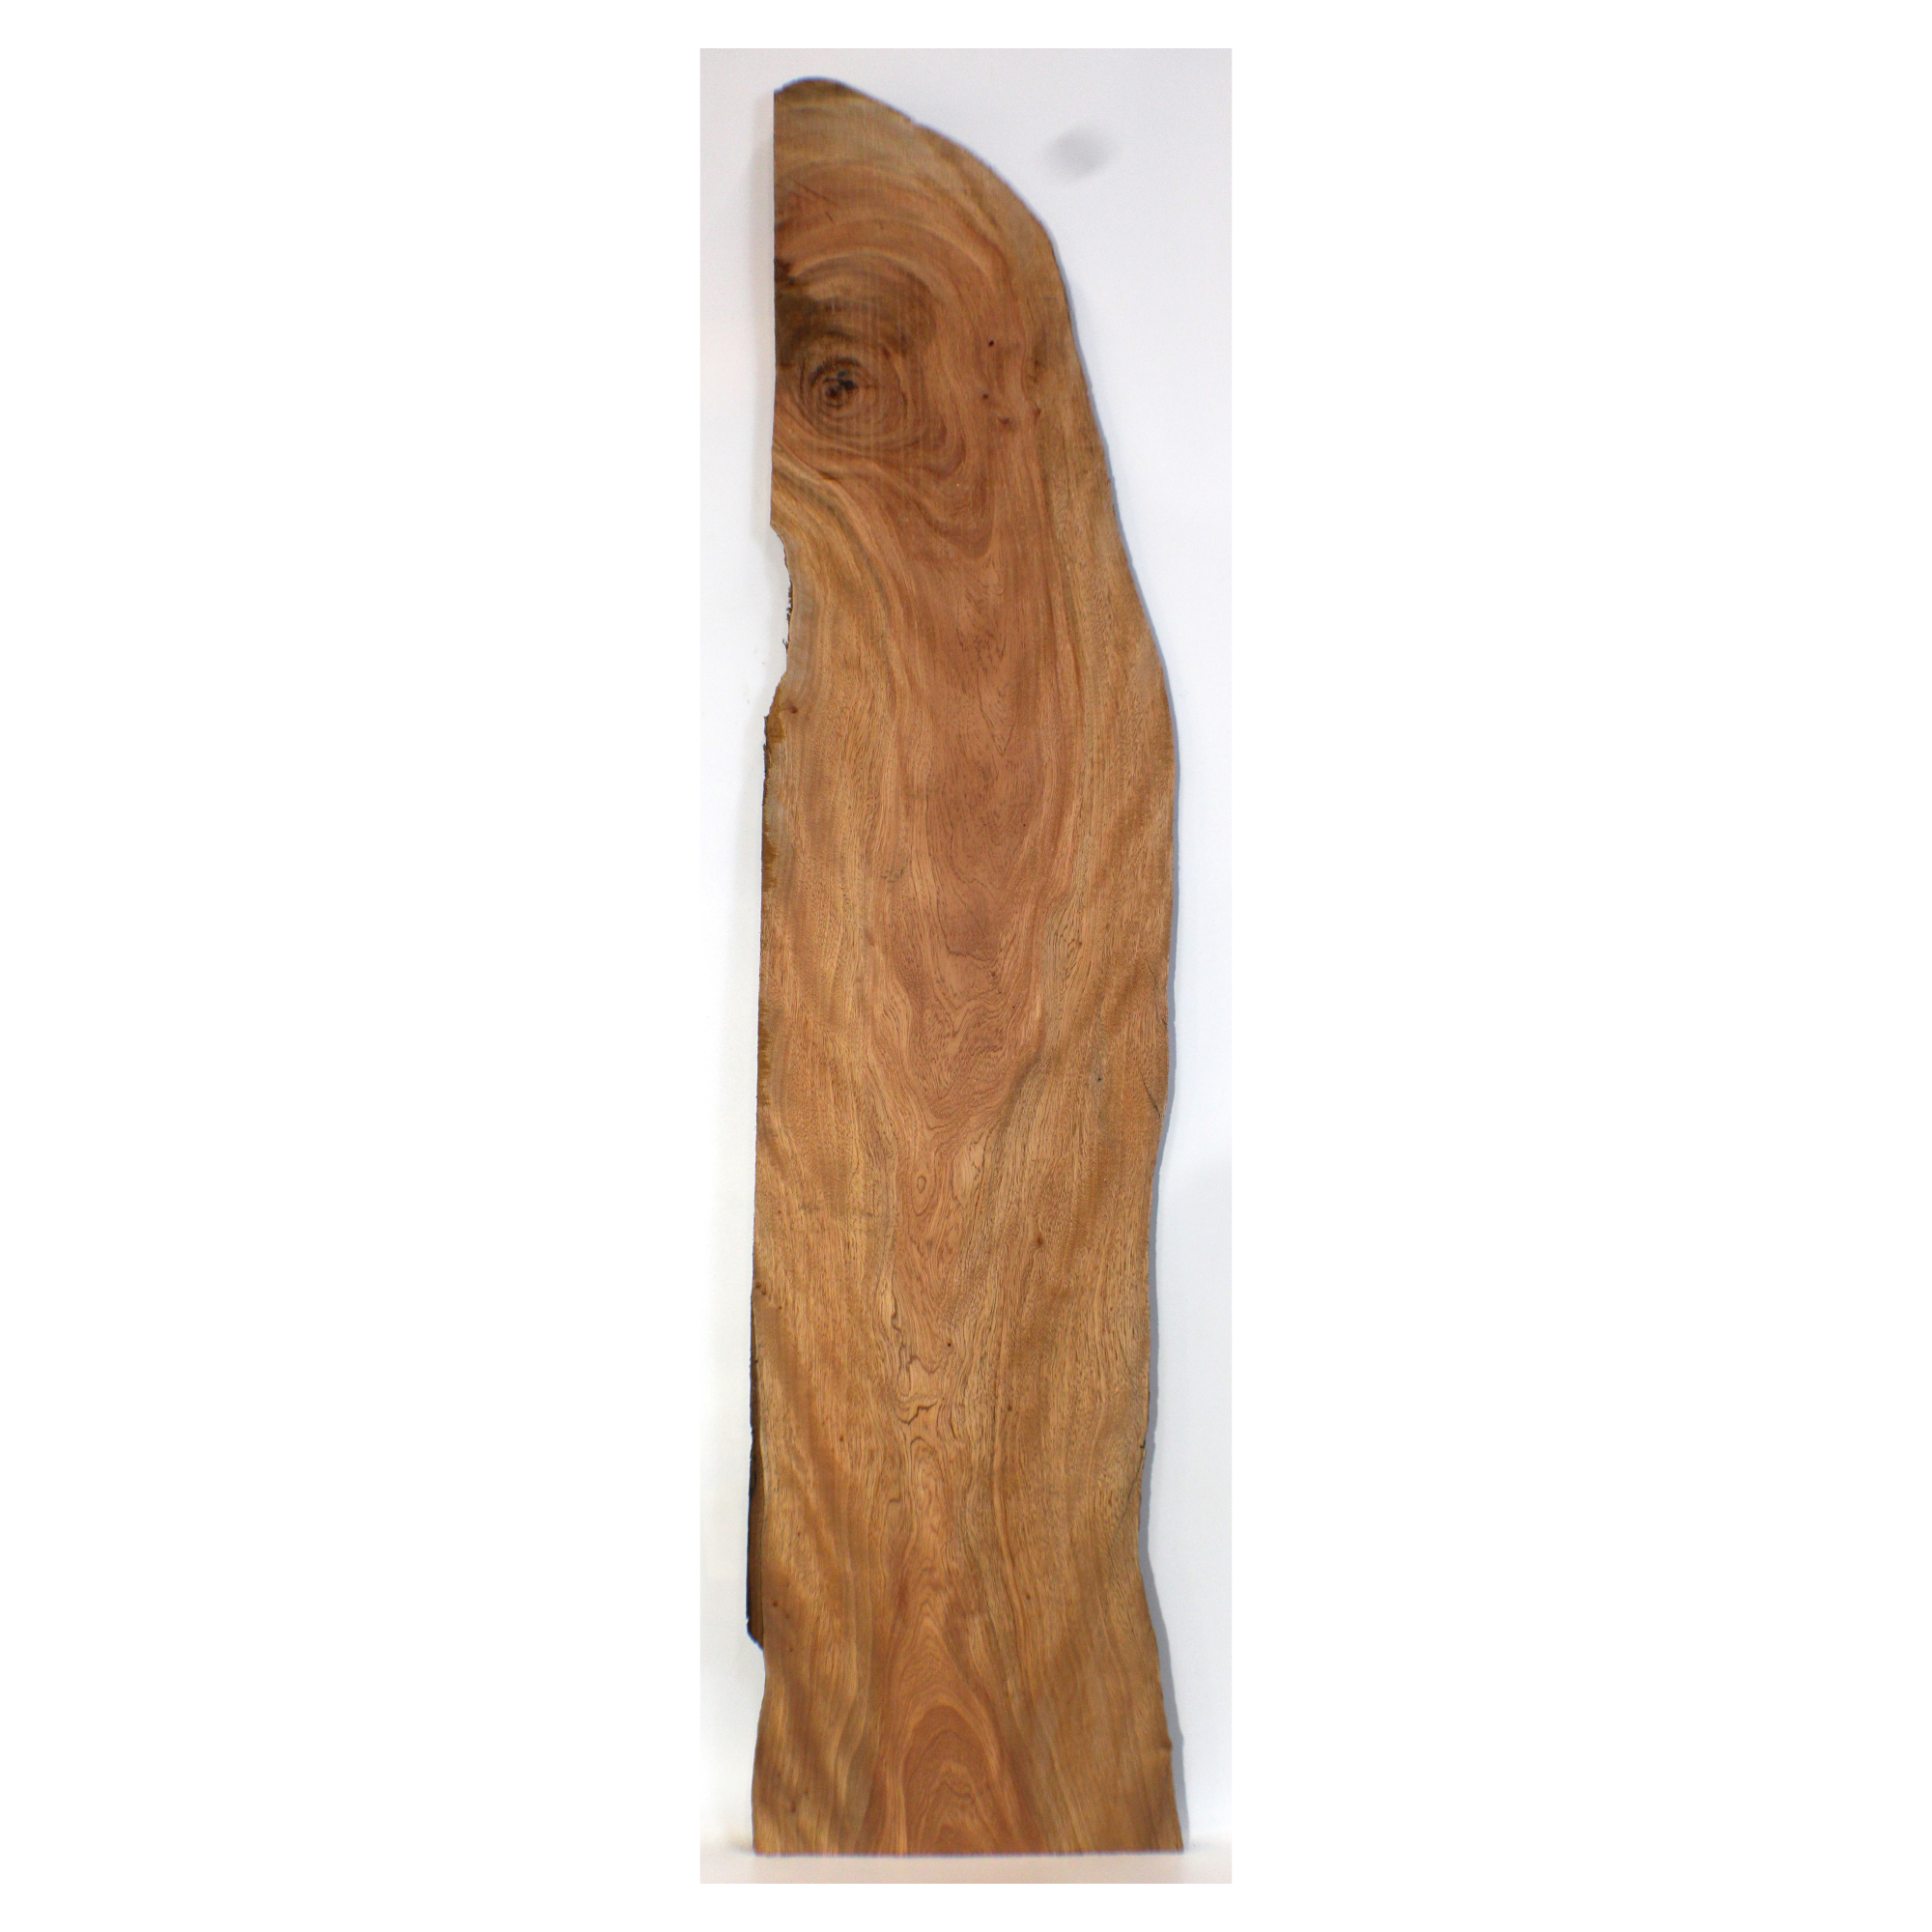 Beautiful, large false kamani craft board with partial live edge, gorgeous color, knot, and light ribbon figure throughout.